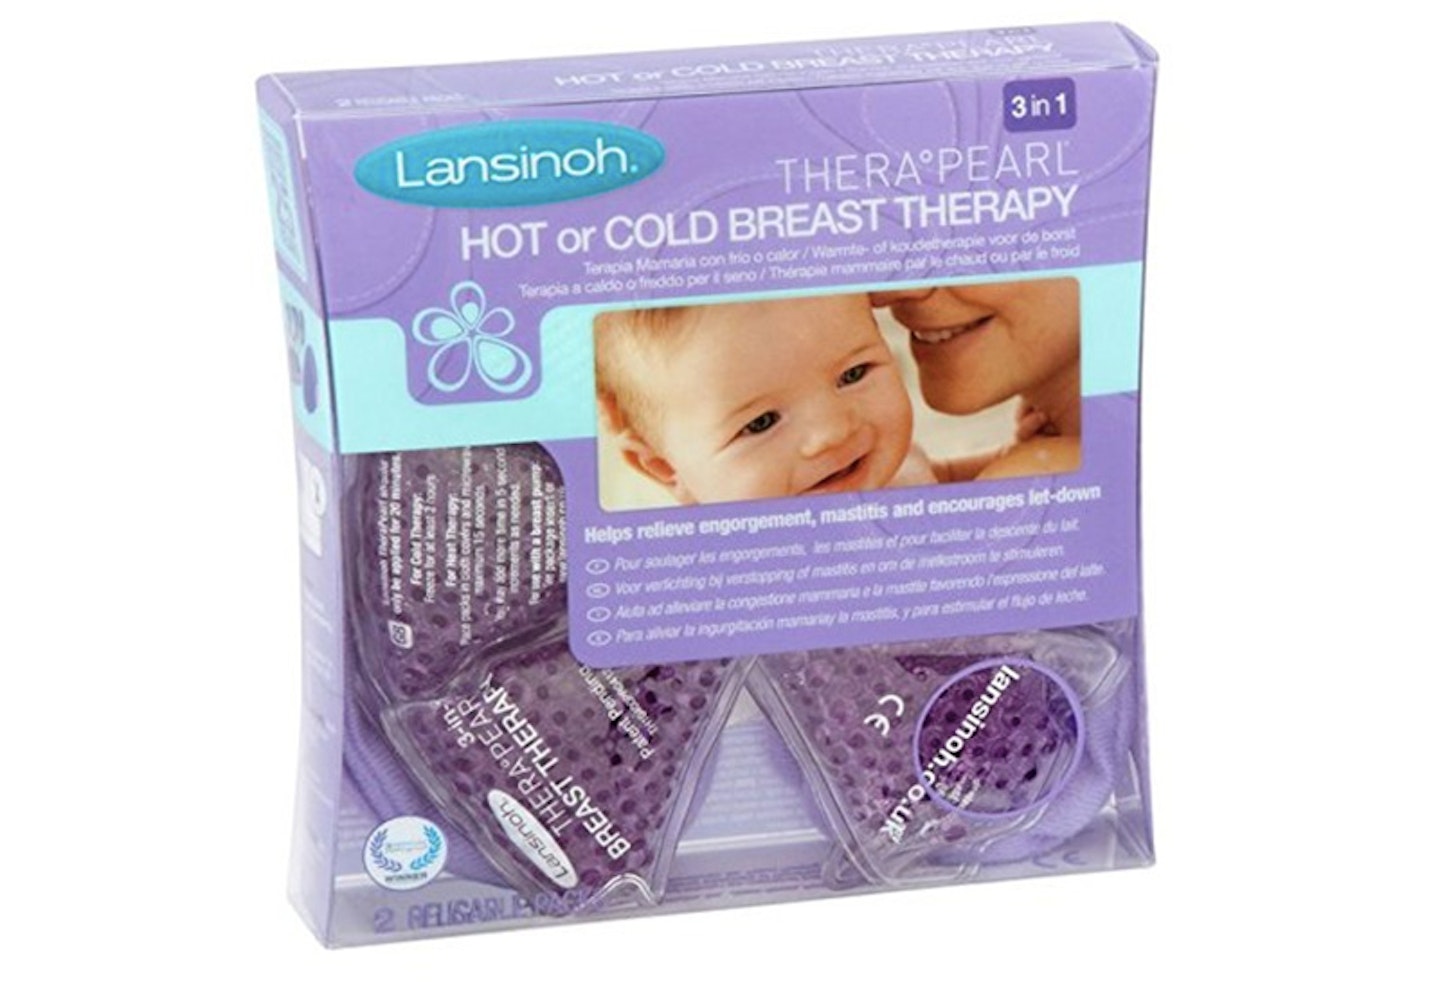 https://images.bauerhosting.com/affiliates/sites/12/motherandbaby/legacy/root/lansinoh-thera-pearl-3-in-1-breast-therapy.jpg?ar=16%3A9&fit=crop&crop=top&auto=format&w=1440&q=80